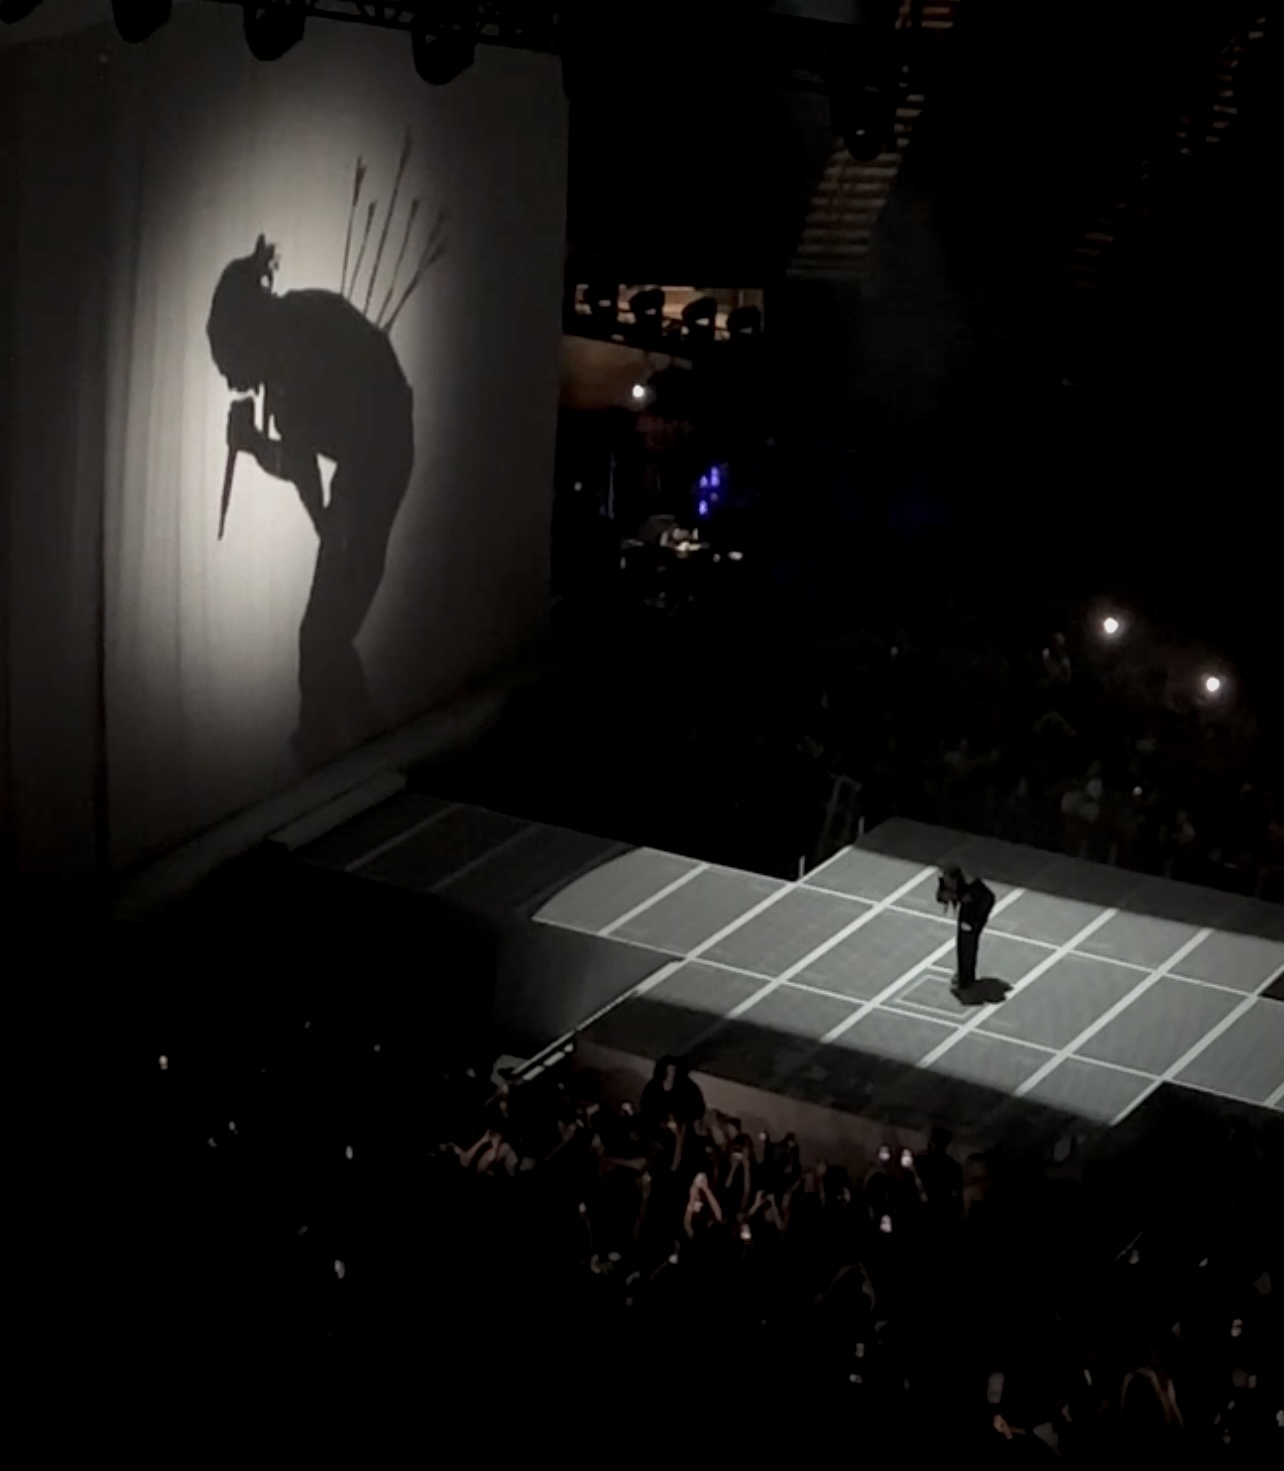 Kendrick Lamar is crouched over singing towards the crowd, holding a microphone to his mouth. A spotlight beams on him, and a large-scale silhouette can be seen behind him projected on long white drapes. On Lamar’s shadow of his crouched figure holding a microphone, arrows can be seen stabbing him in the back